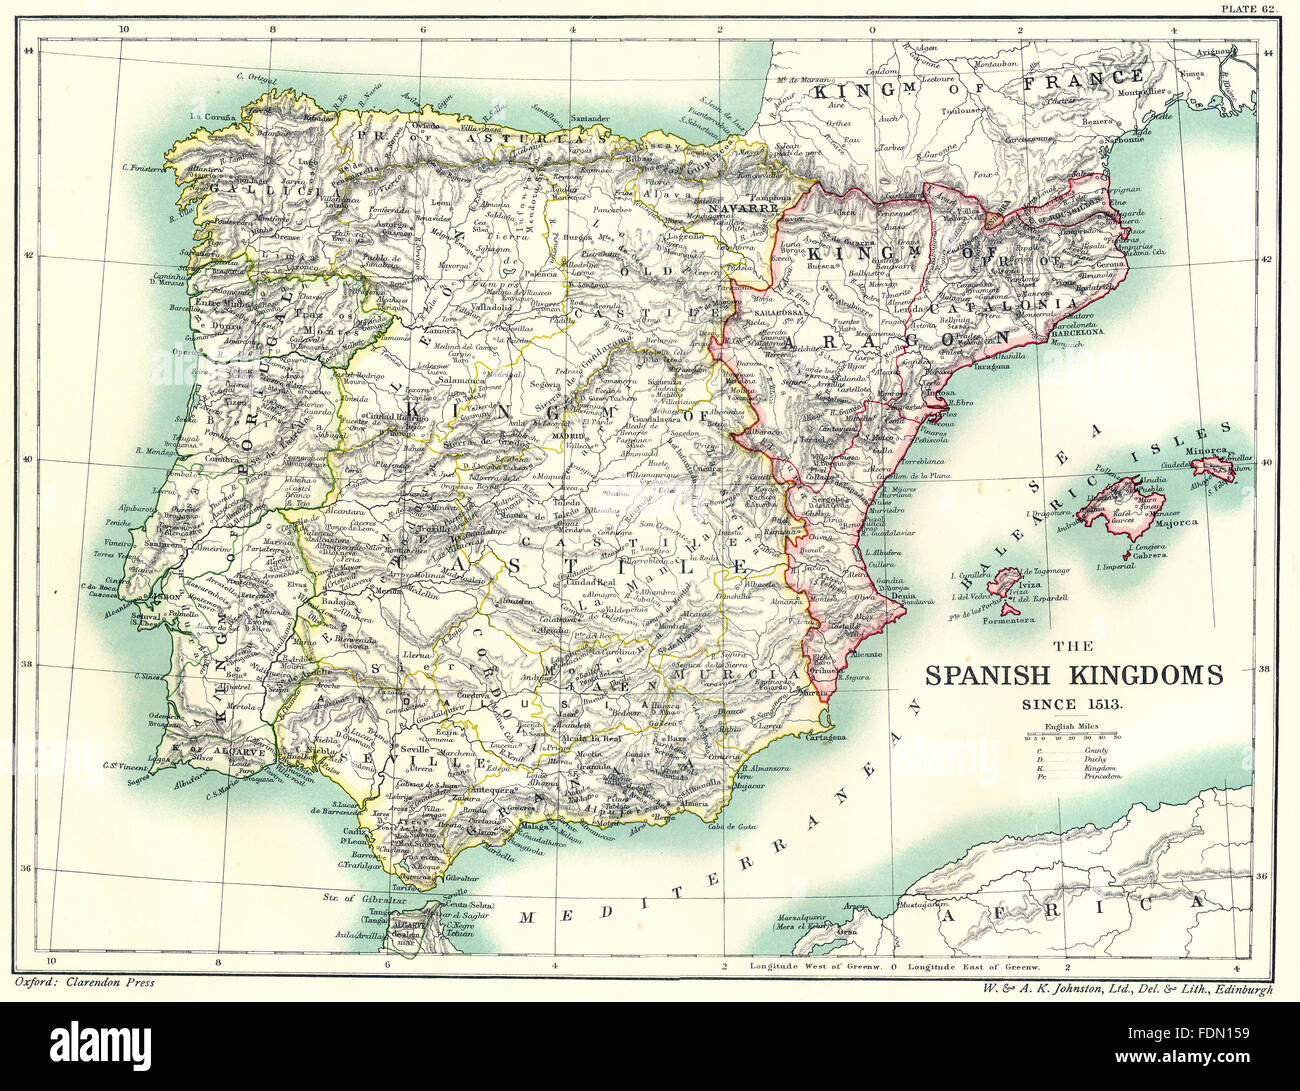 SPAIN: The Spanish Kingdoms Since 1513, 1903 antique map Stock Photo